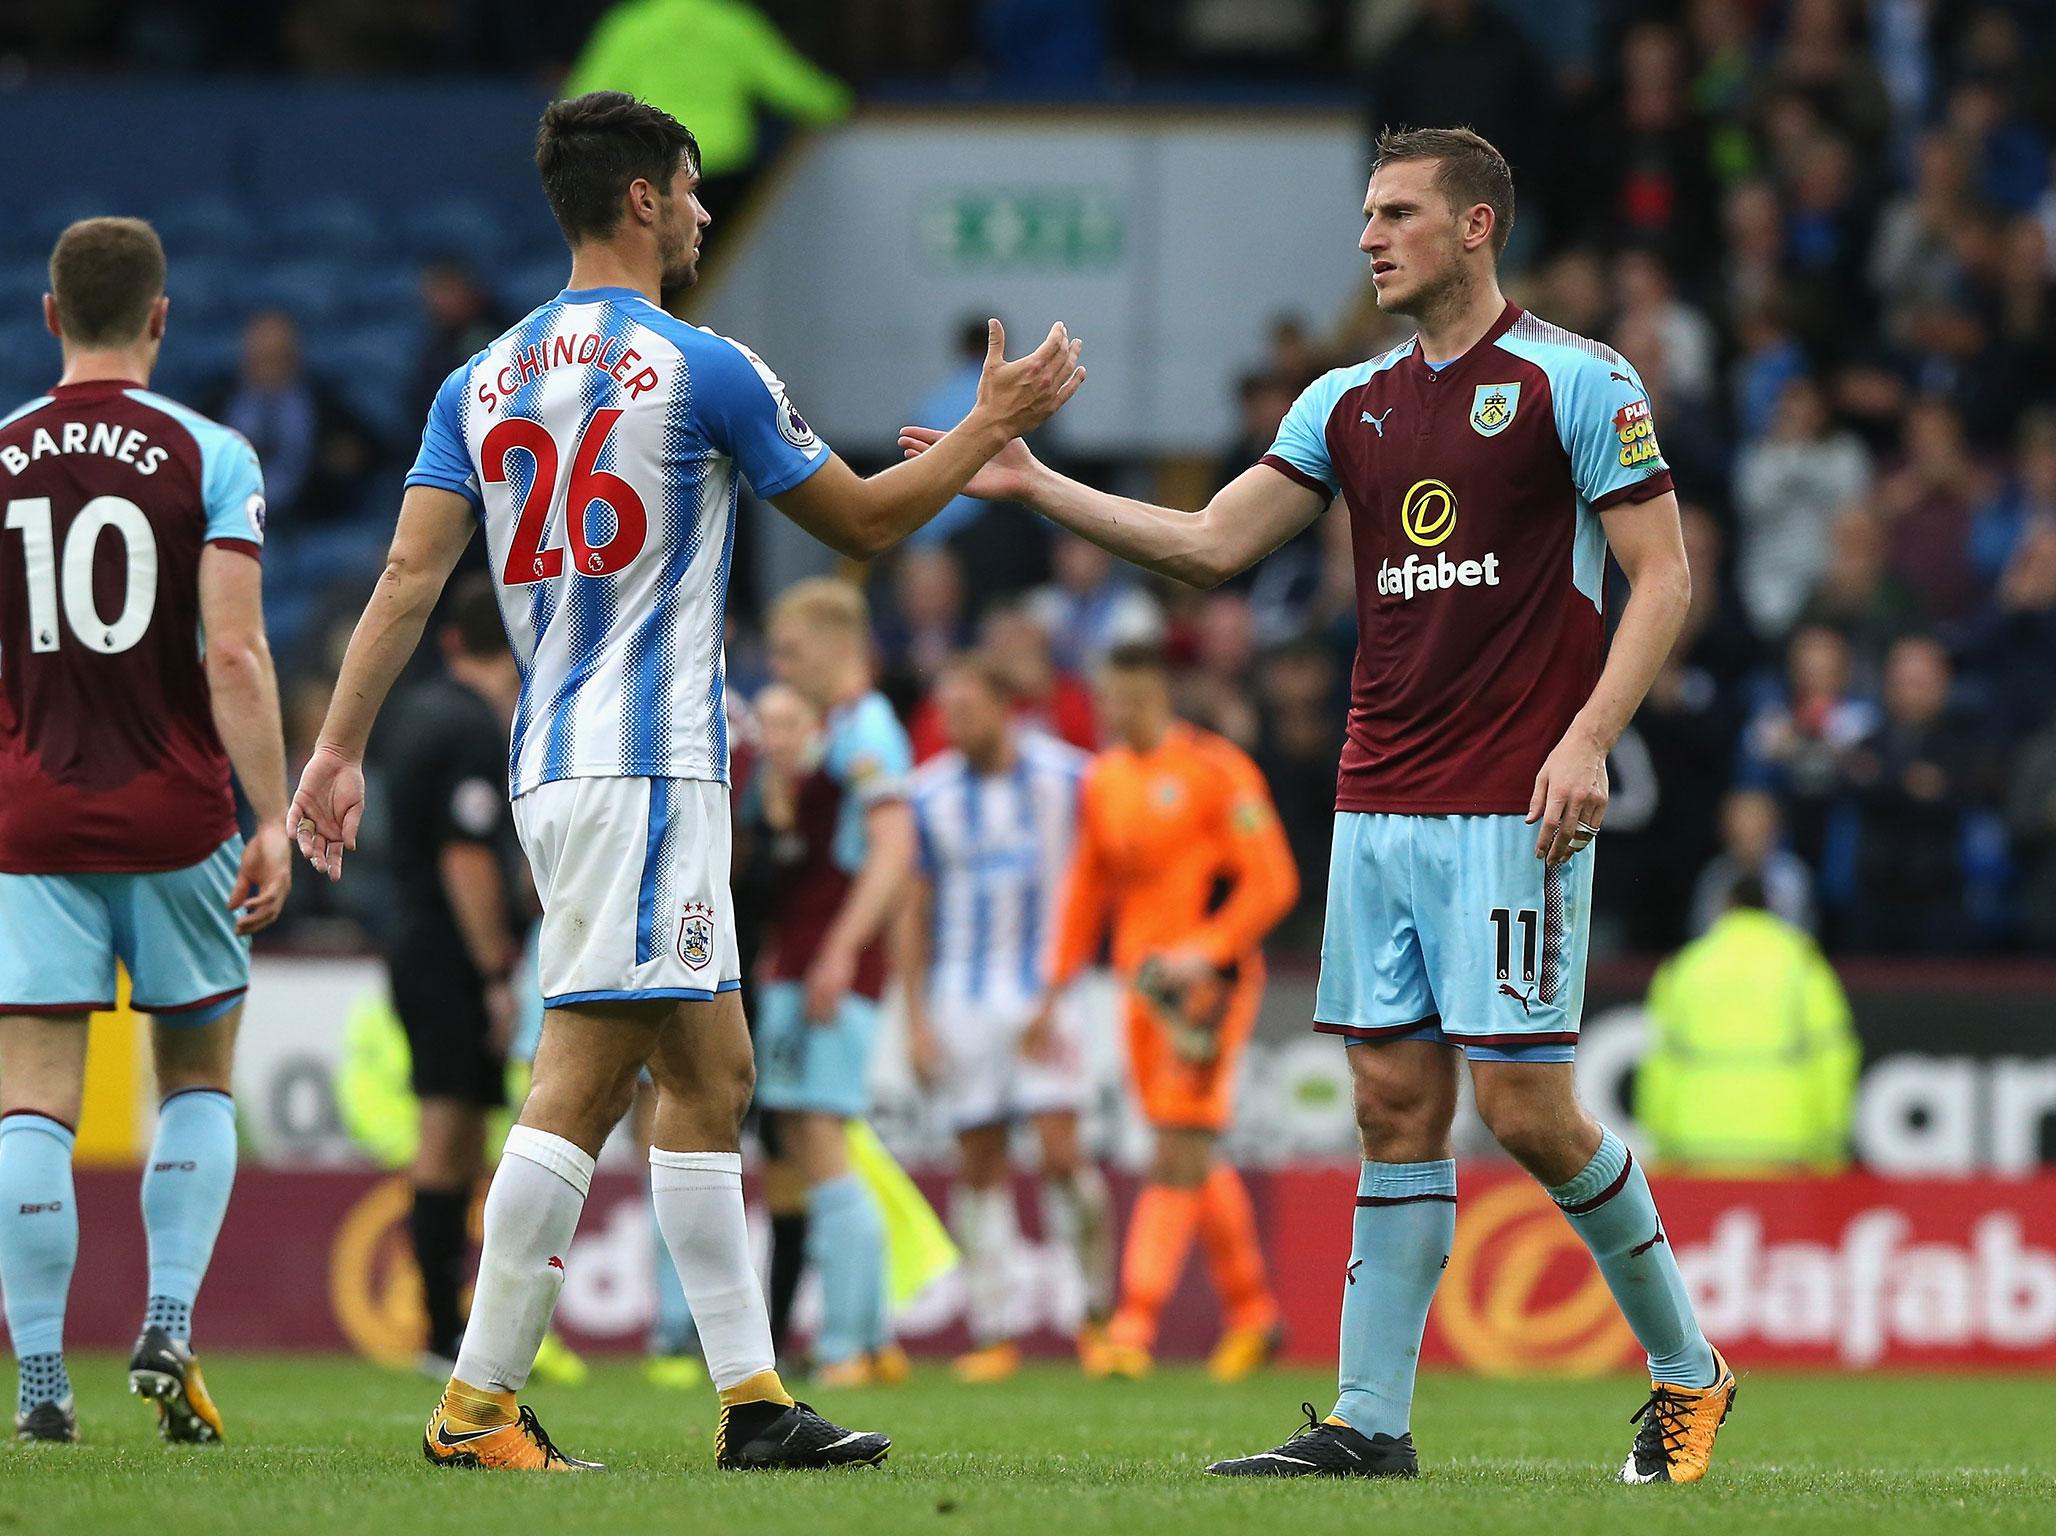 Burnley and Huddersfield couldn't be separated at Turf Moor